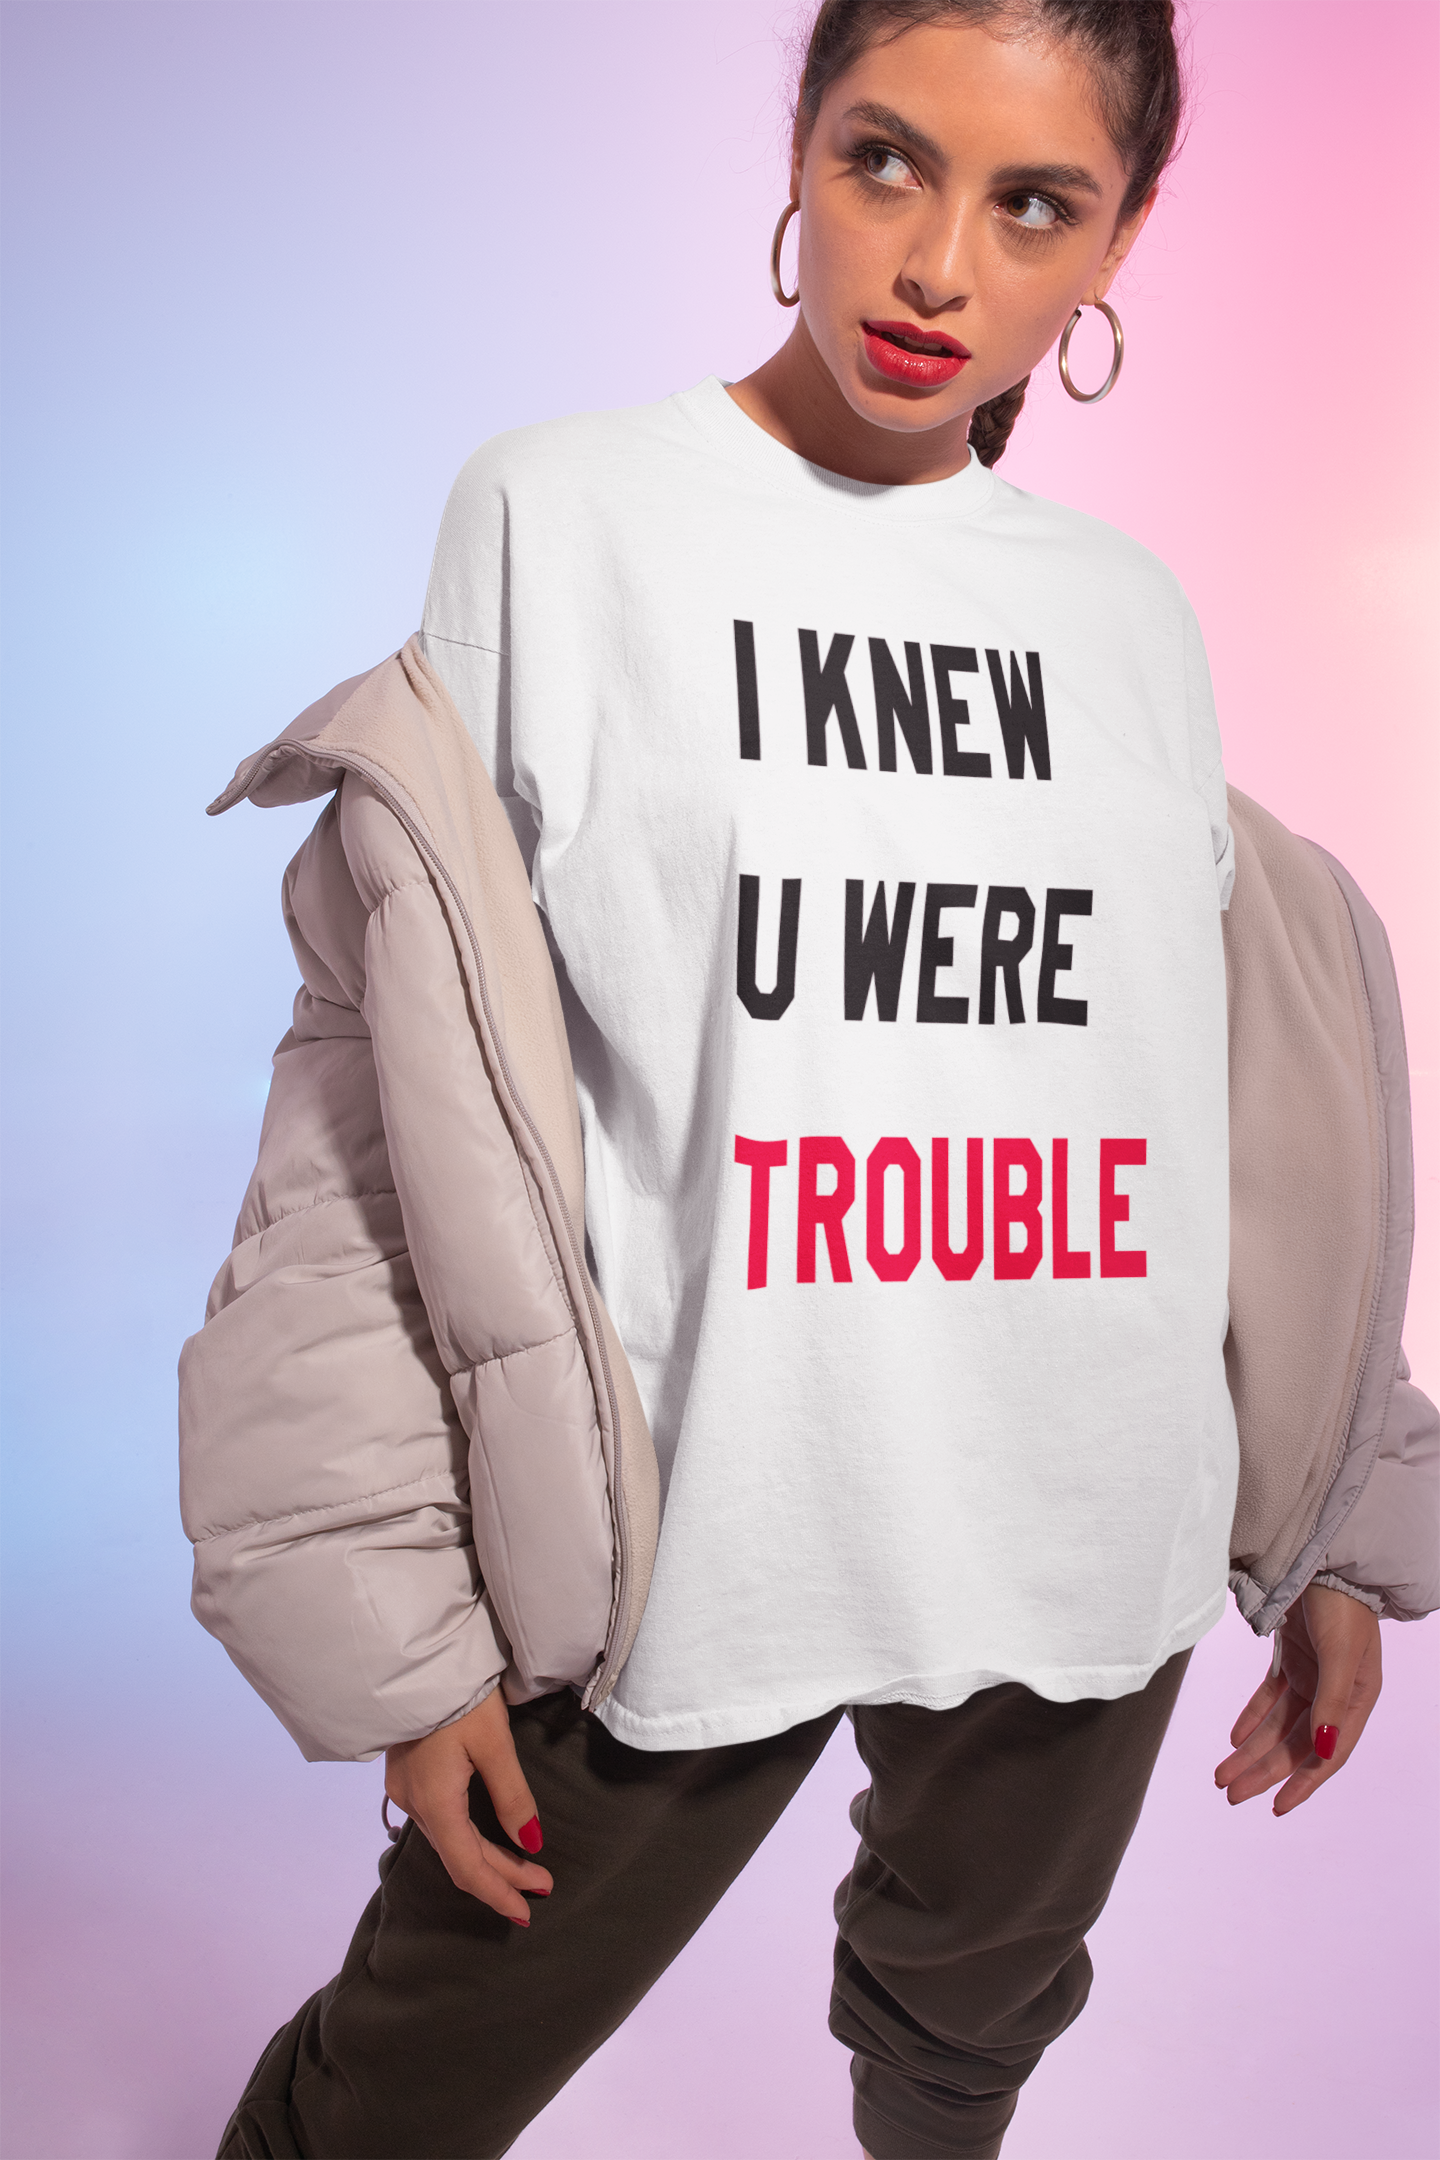 I Knew You Were Trouble New TTPD Era Mens T-shirt